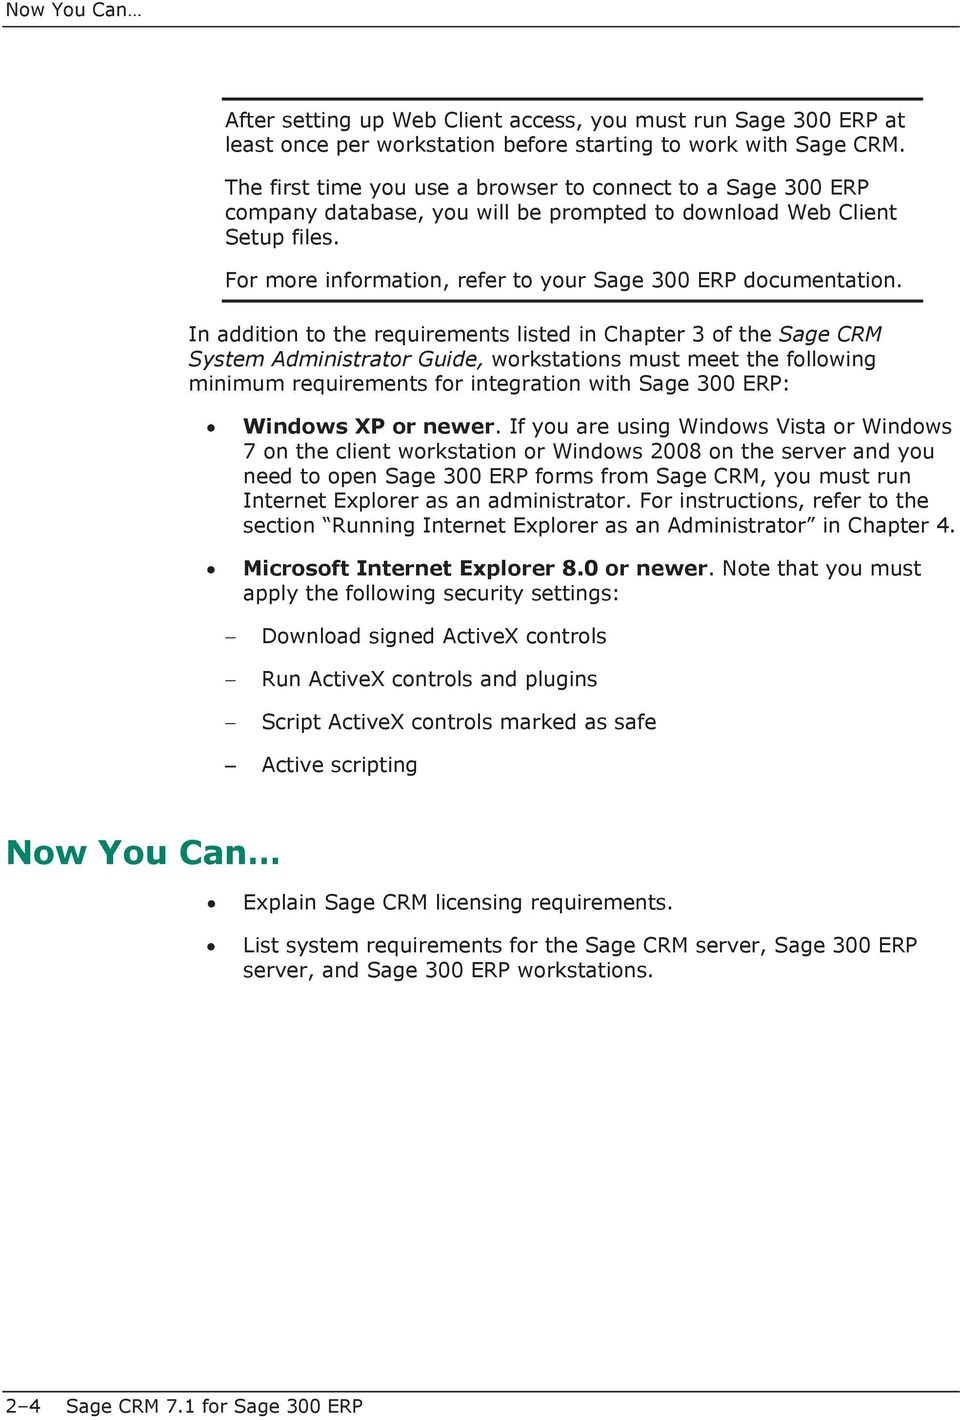 In addition to the requirements listed in Chapter 3 of the Sage CRM System Administrator Guide, workstations must meet the following minimum requirements for integration with Sage 300 ERP: Windows XP